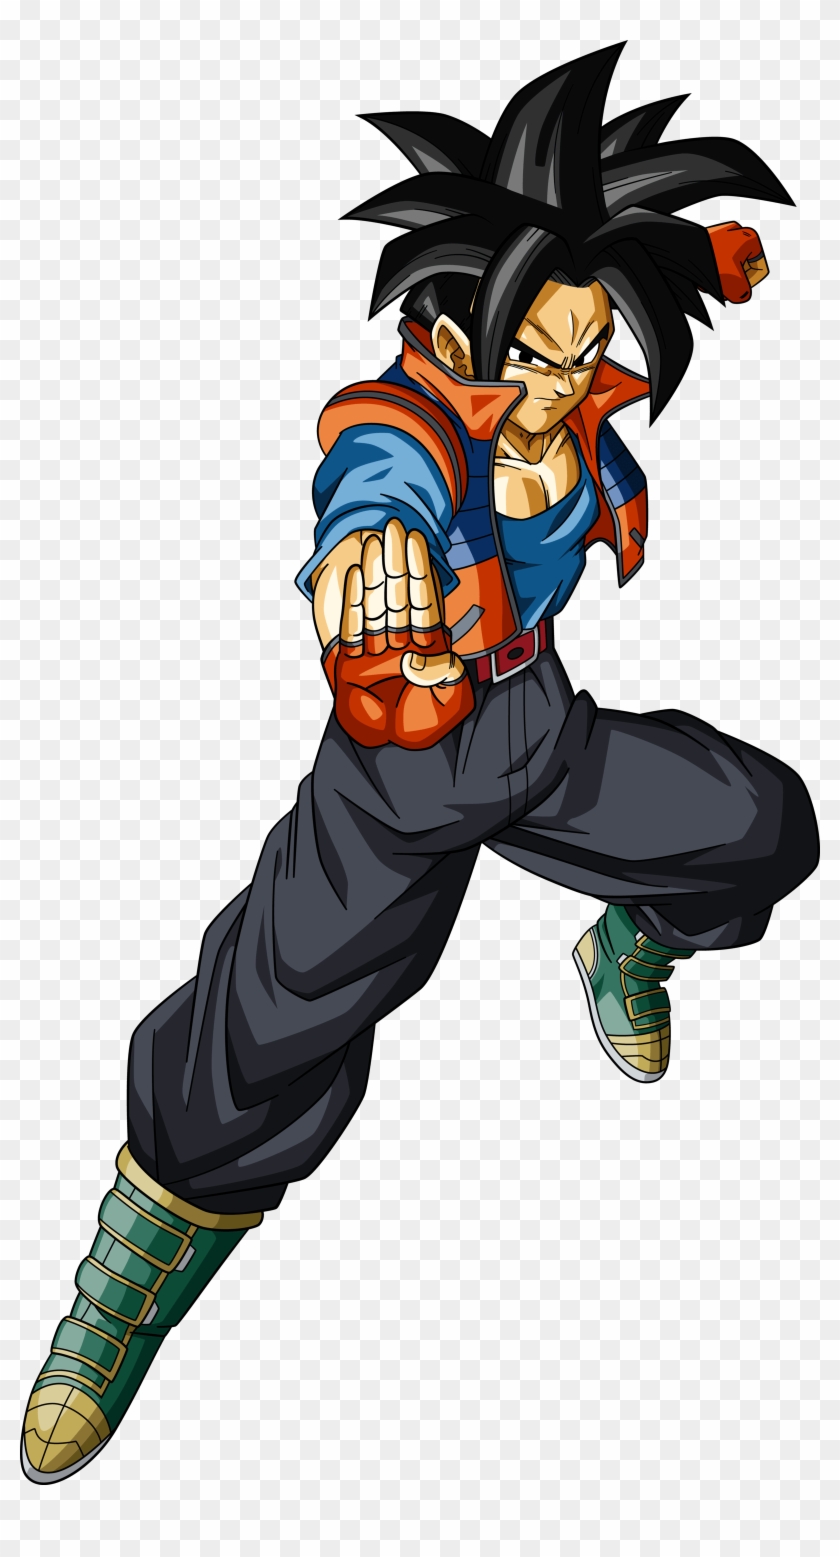 Dragon Ball Wiki png images